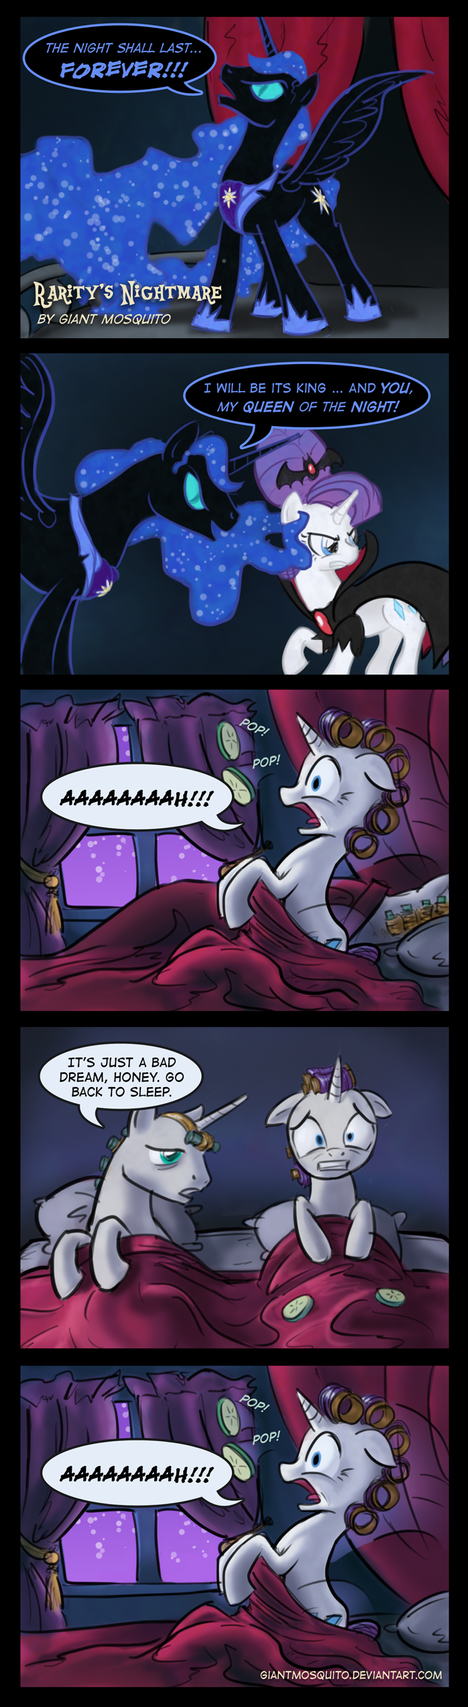 rarity_s_nightmare_by_giantmosquito-d4gp